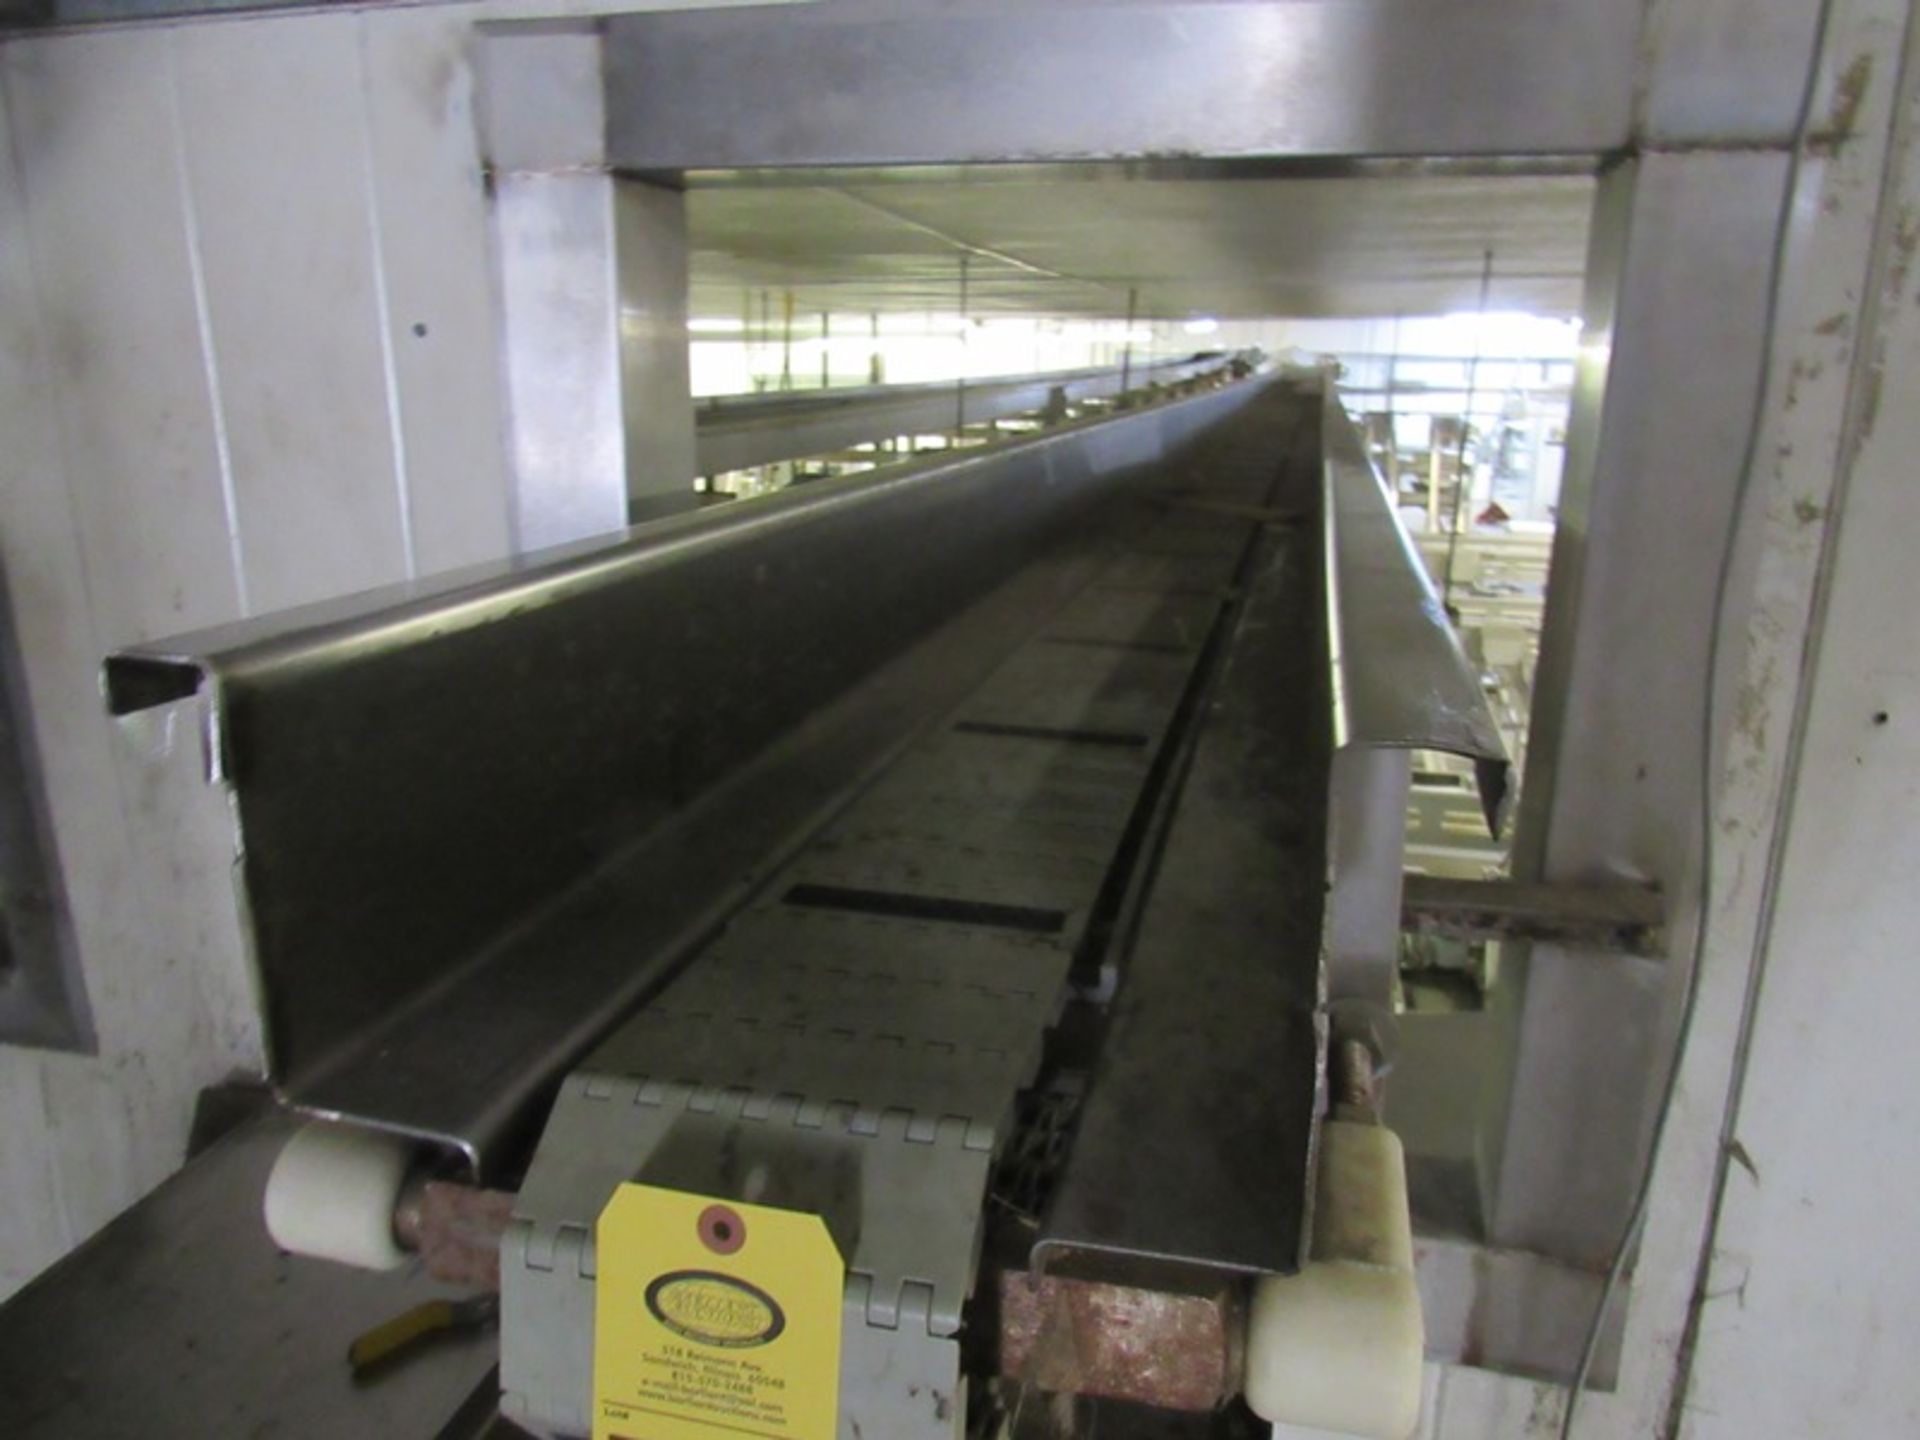 Stainless Steel Ceiling Suspend Conveyor, 6" W X 36' L, 1 h.p. motor (Required Loading Fee $1,000.00